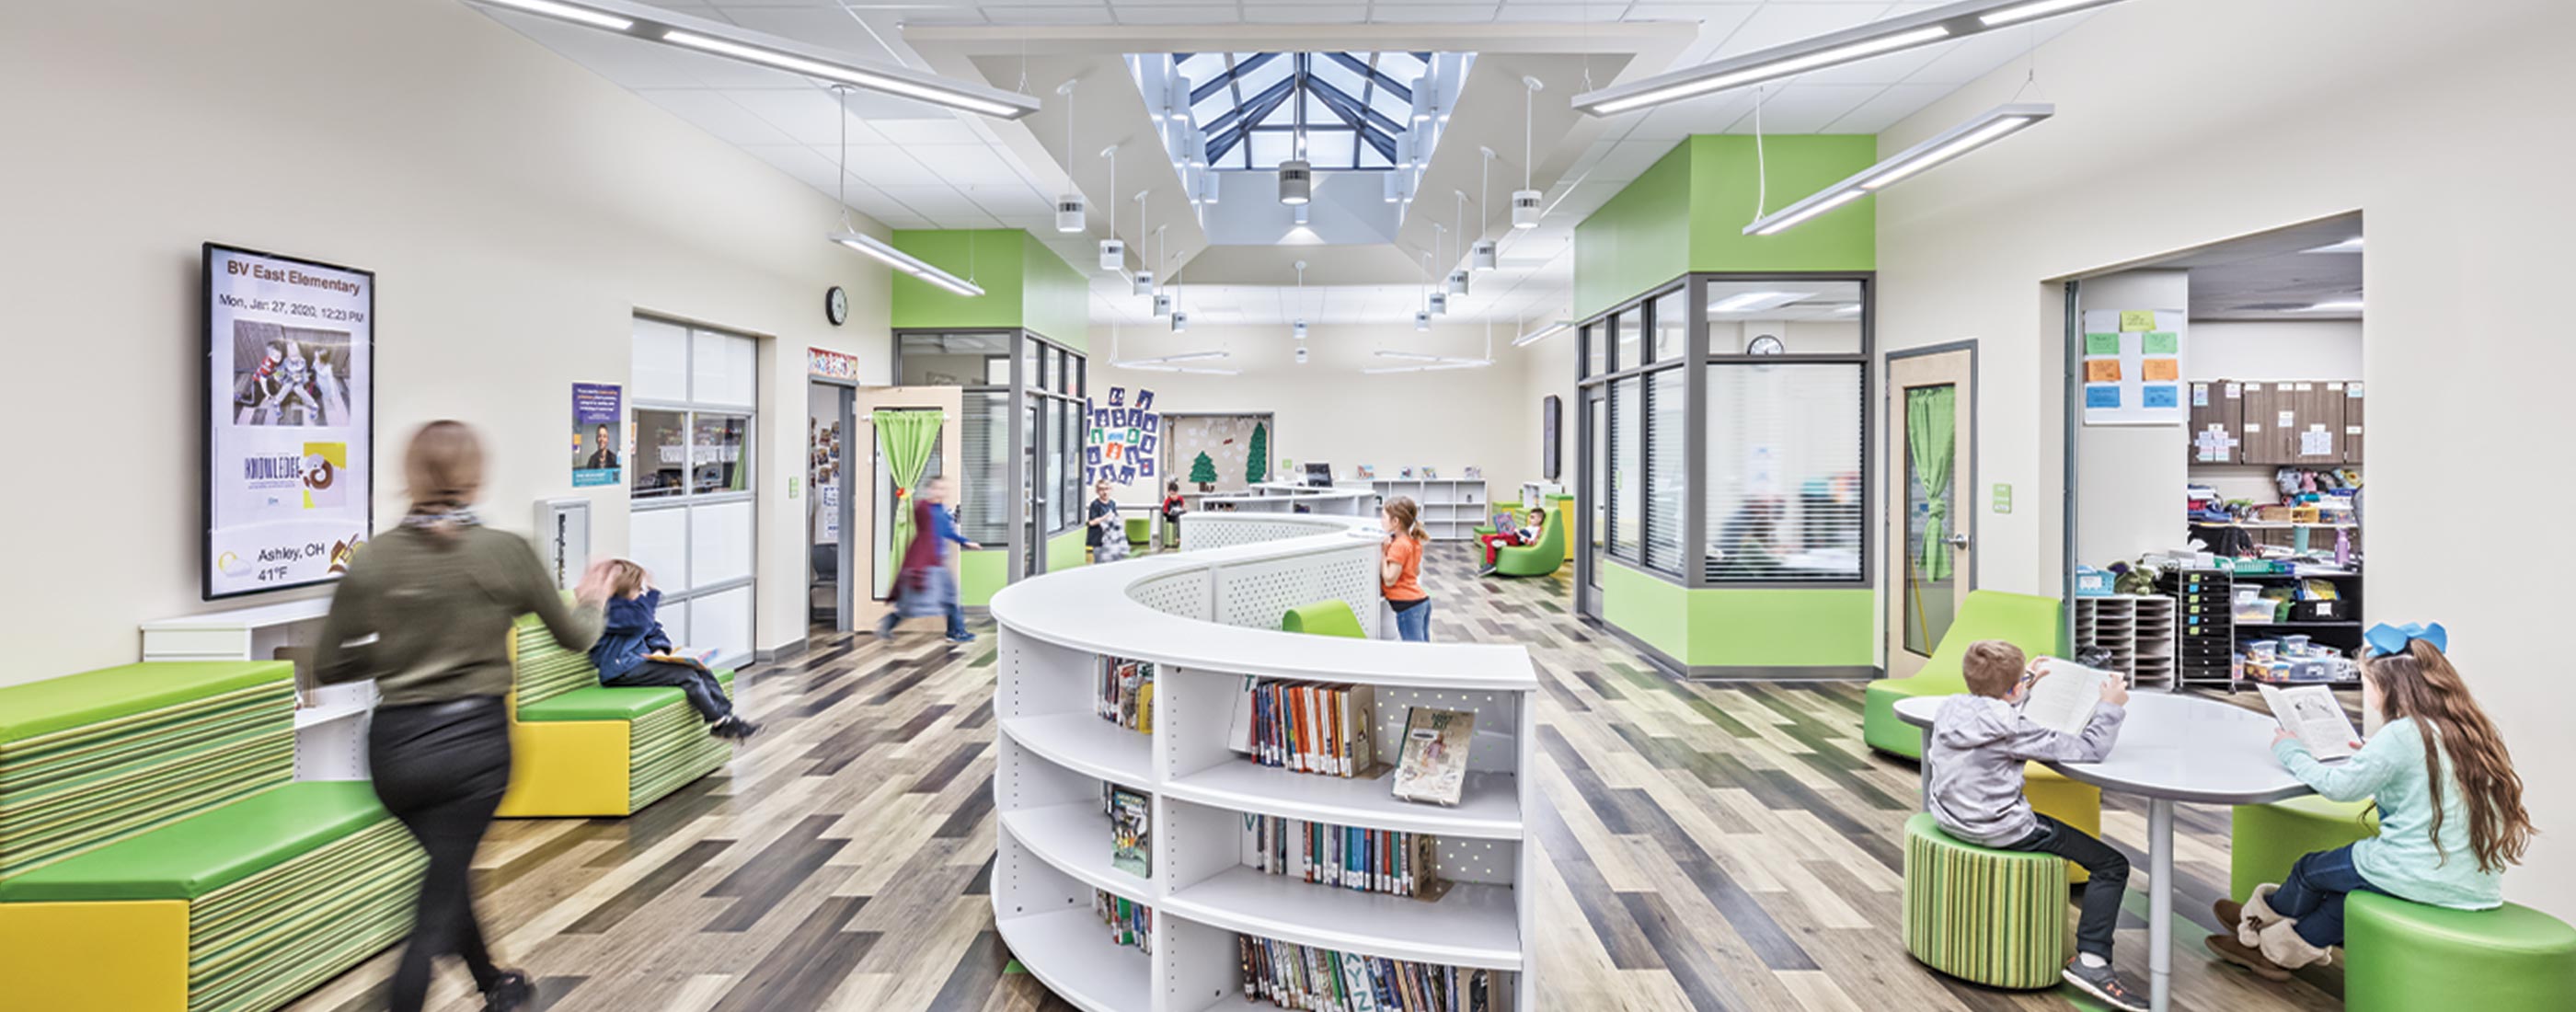 Buckeye Valley Elementary schools are designed with connectivity throughout spaces.